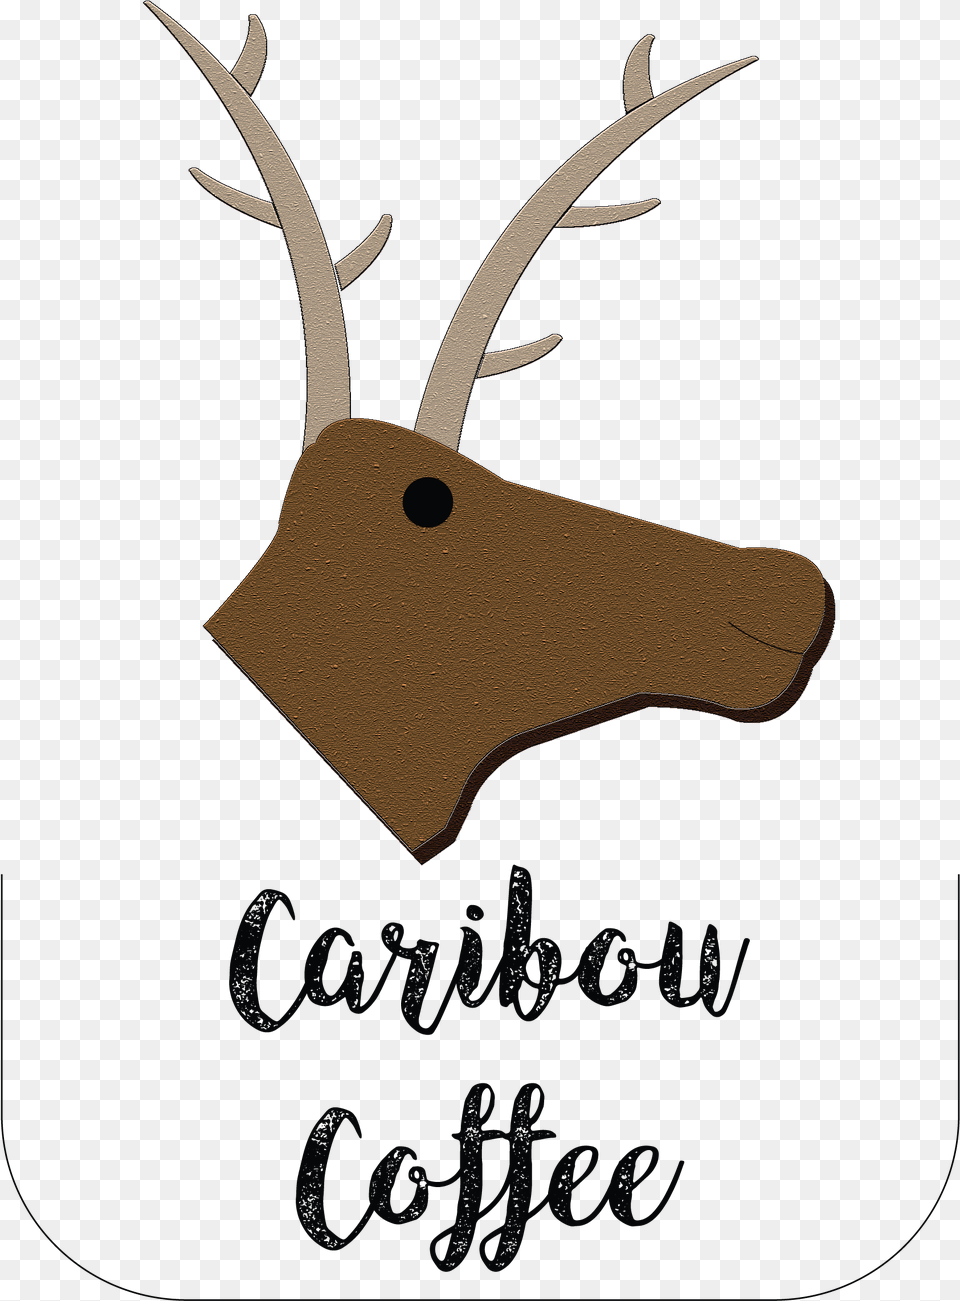 I Went With A More Rusticgrain Look For This Logo, Animal, Antler, Deer, Mammal Free Transparent Png